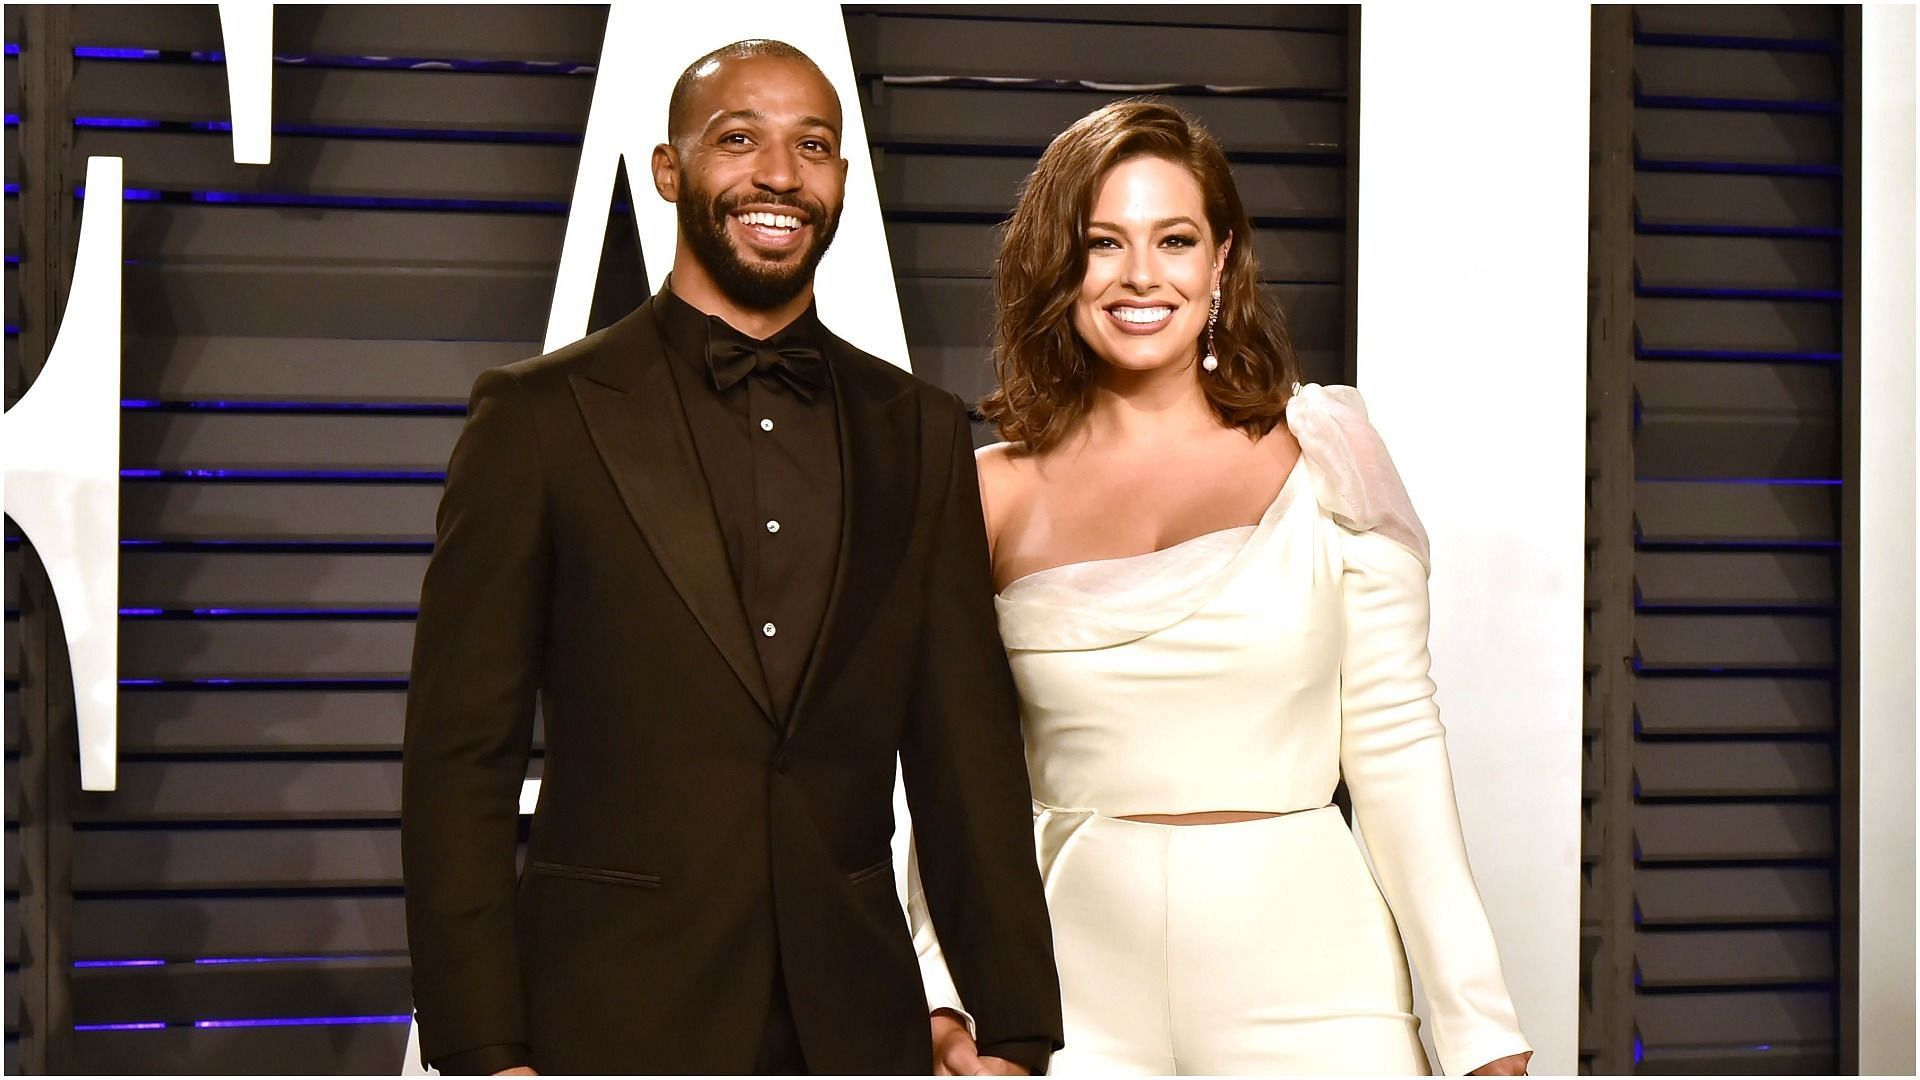 Ashley Graham and Justin Ervin welcomed their twins early in February 2022 (Image via Getty Images/David Crotty)